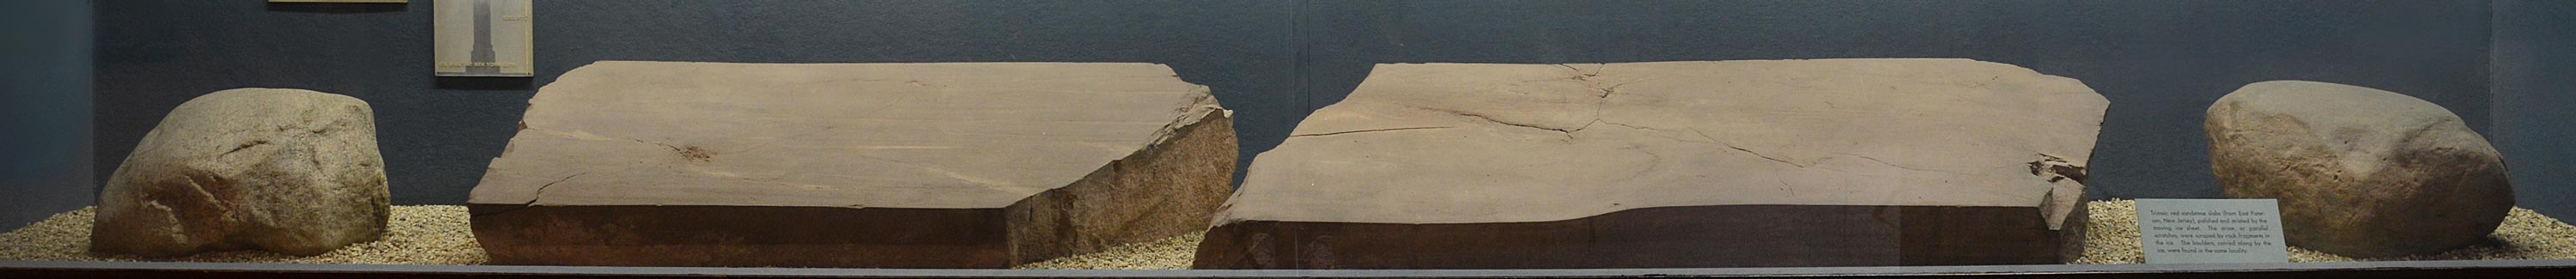 Bottom of museum case showing four pieces of red sandstone slabs.